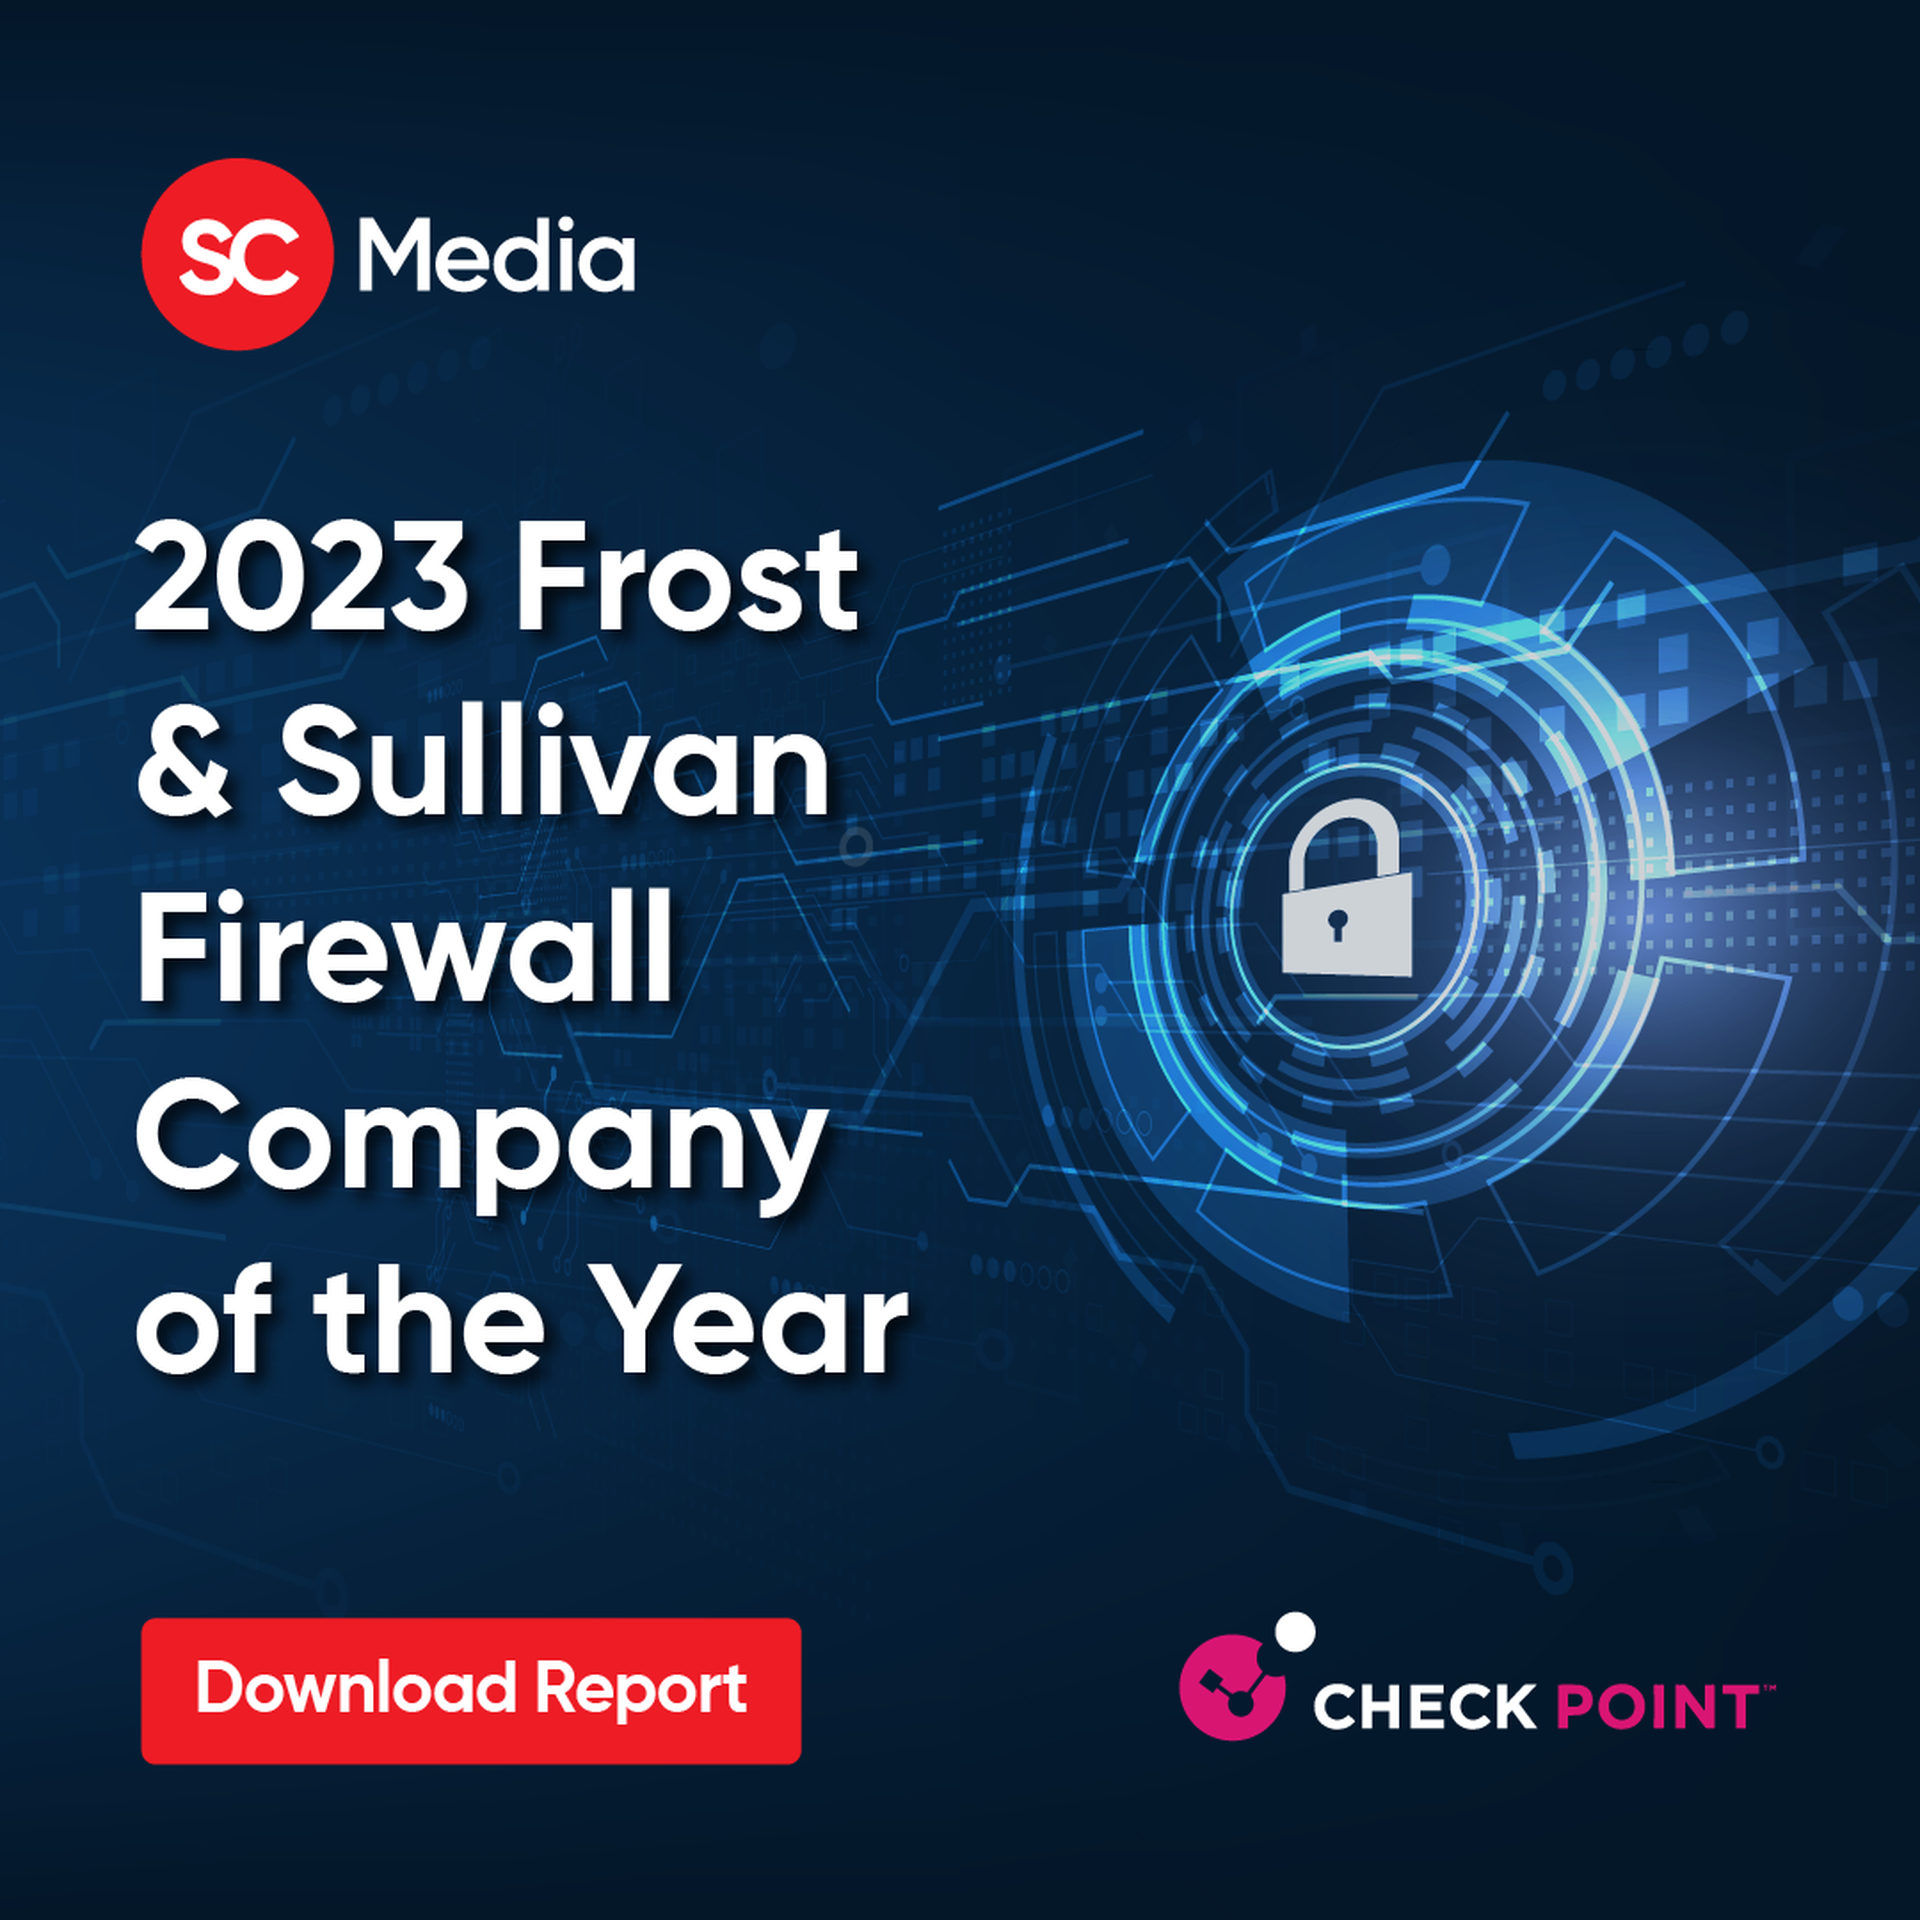 2023 Frost & Sullivan Firewall Company of the Year